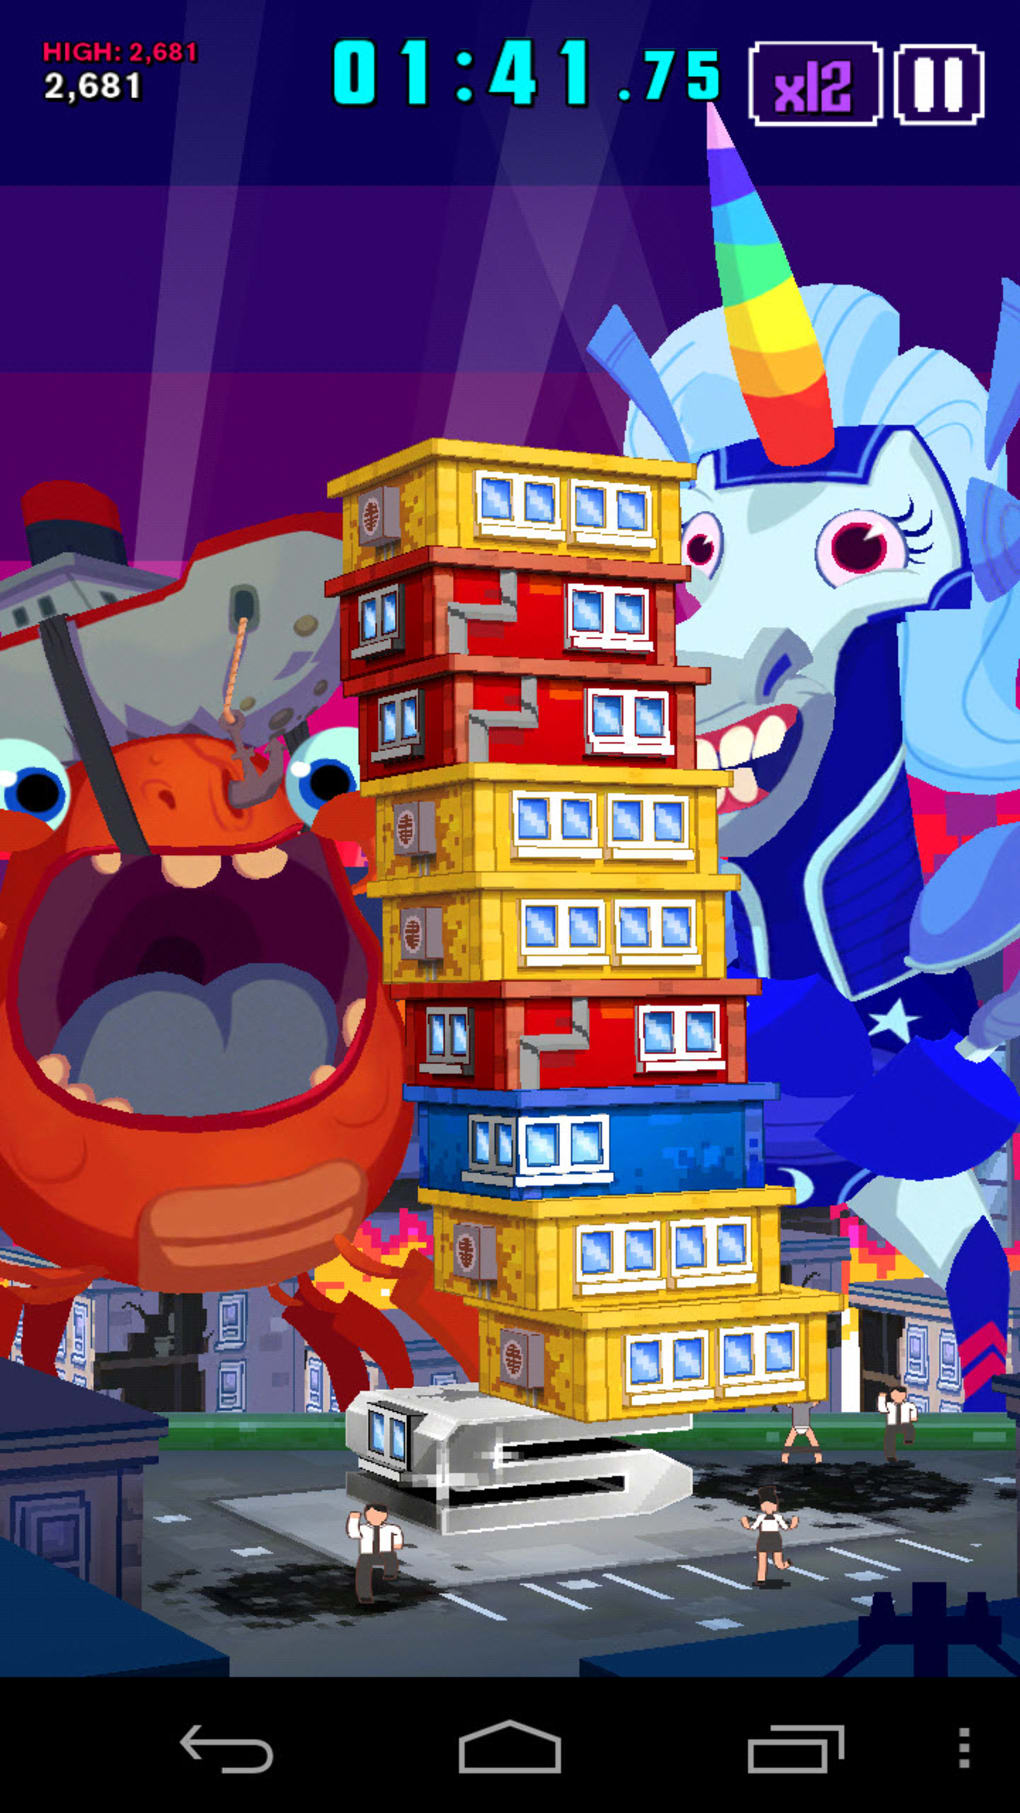 App of the Day: Super Monsters Ate My Condo - CNET